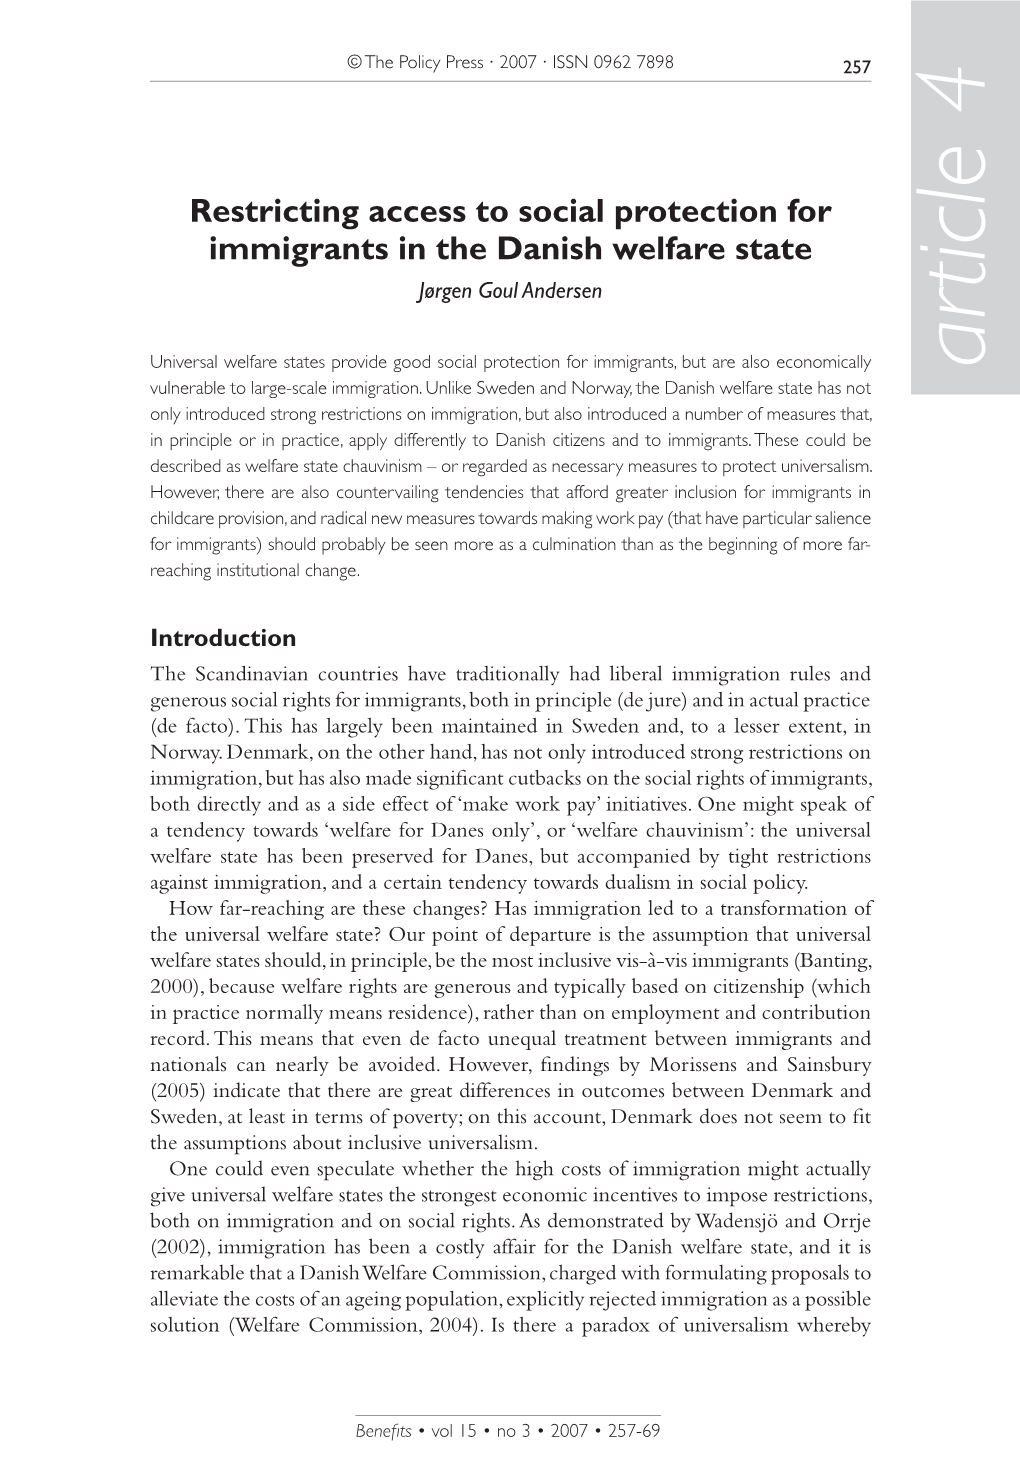 Restricting Access to Social Protection for Immigrants in the Danish Welfare State Jørgen Goul Andersen